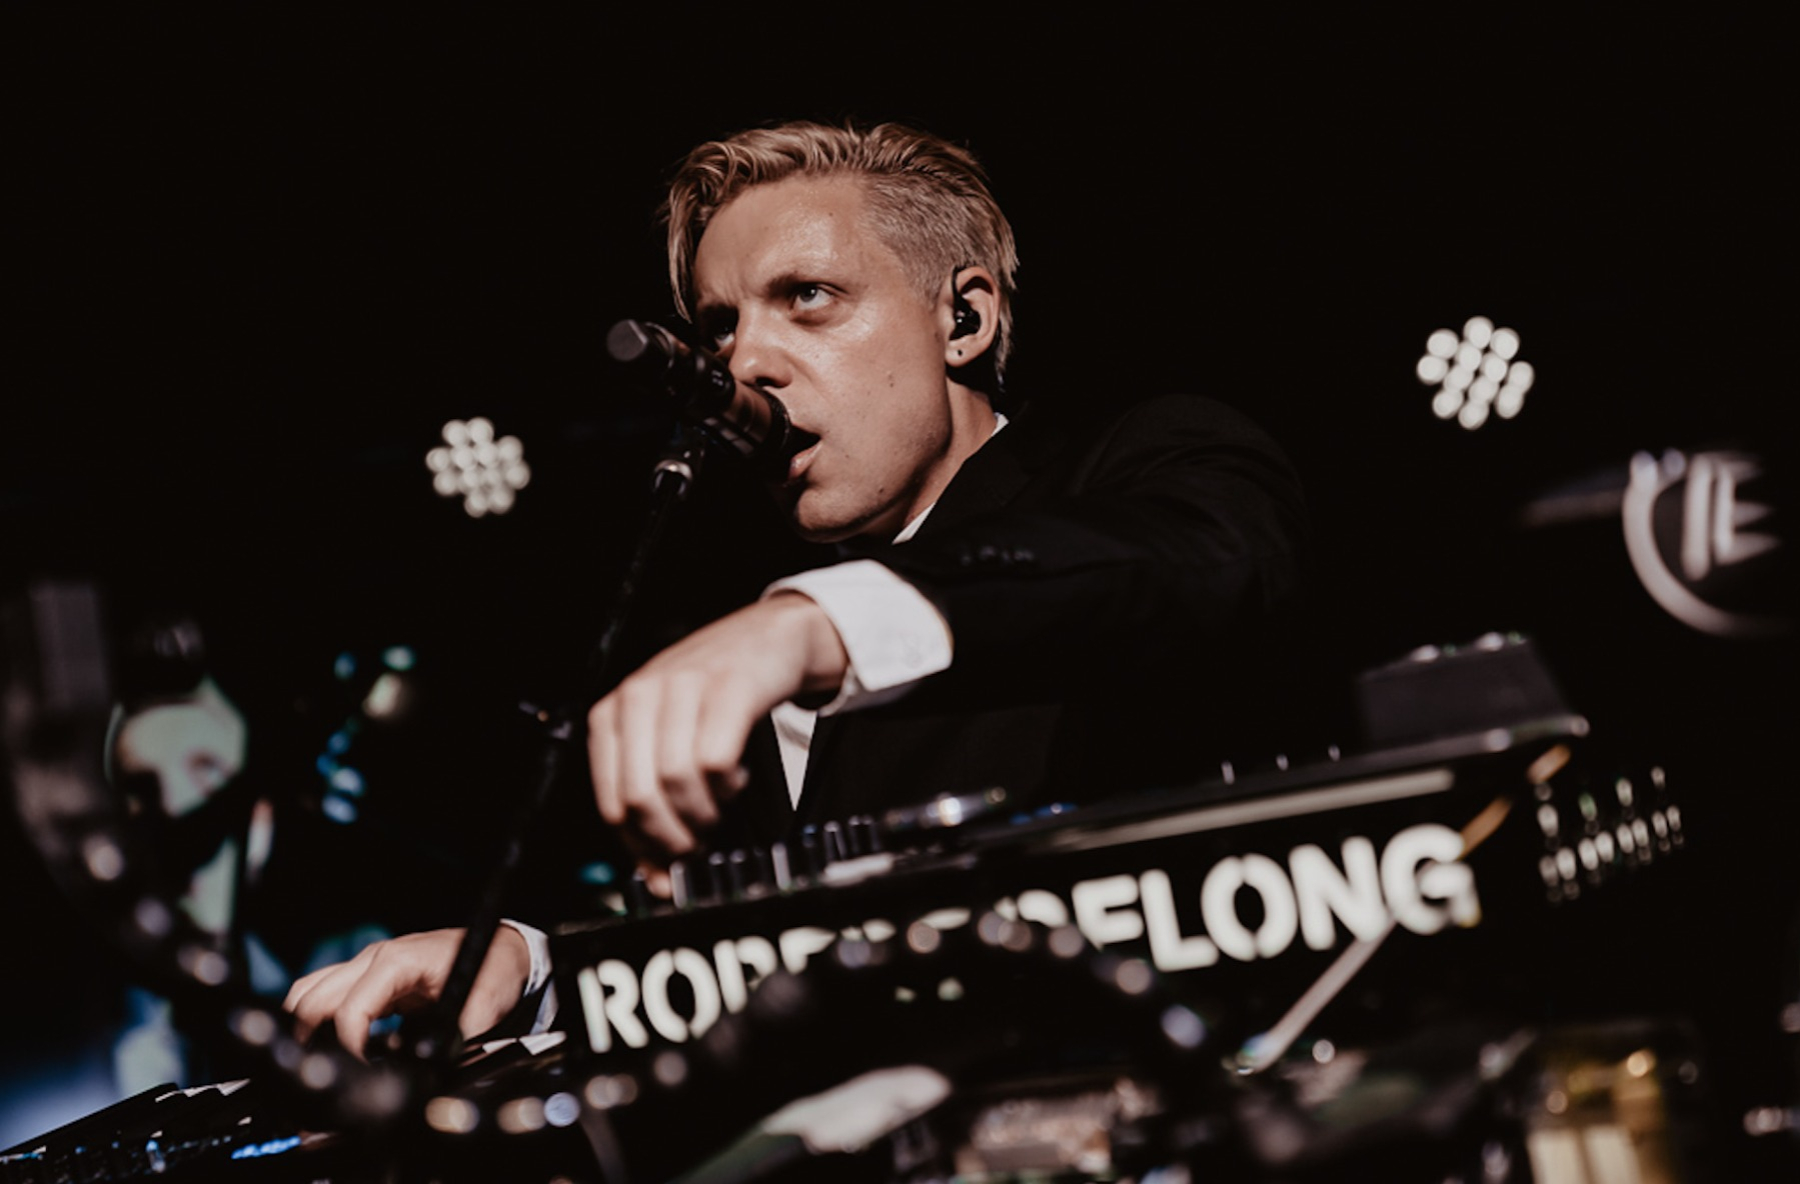 Join Us for an Exclusive Masterclass with Dance-Pop One-Man Band Robert DeLong